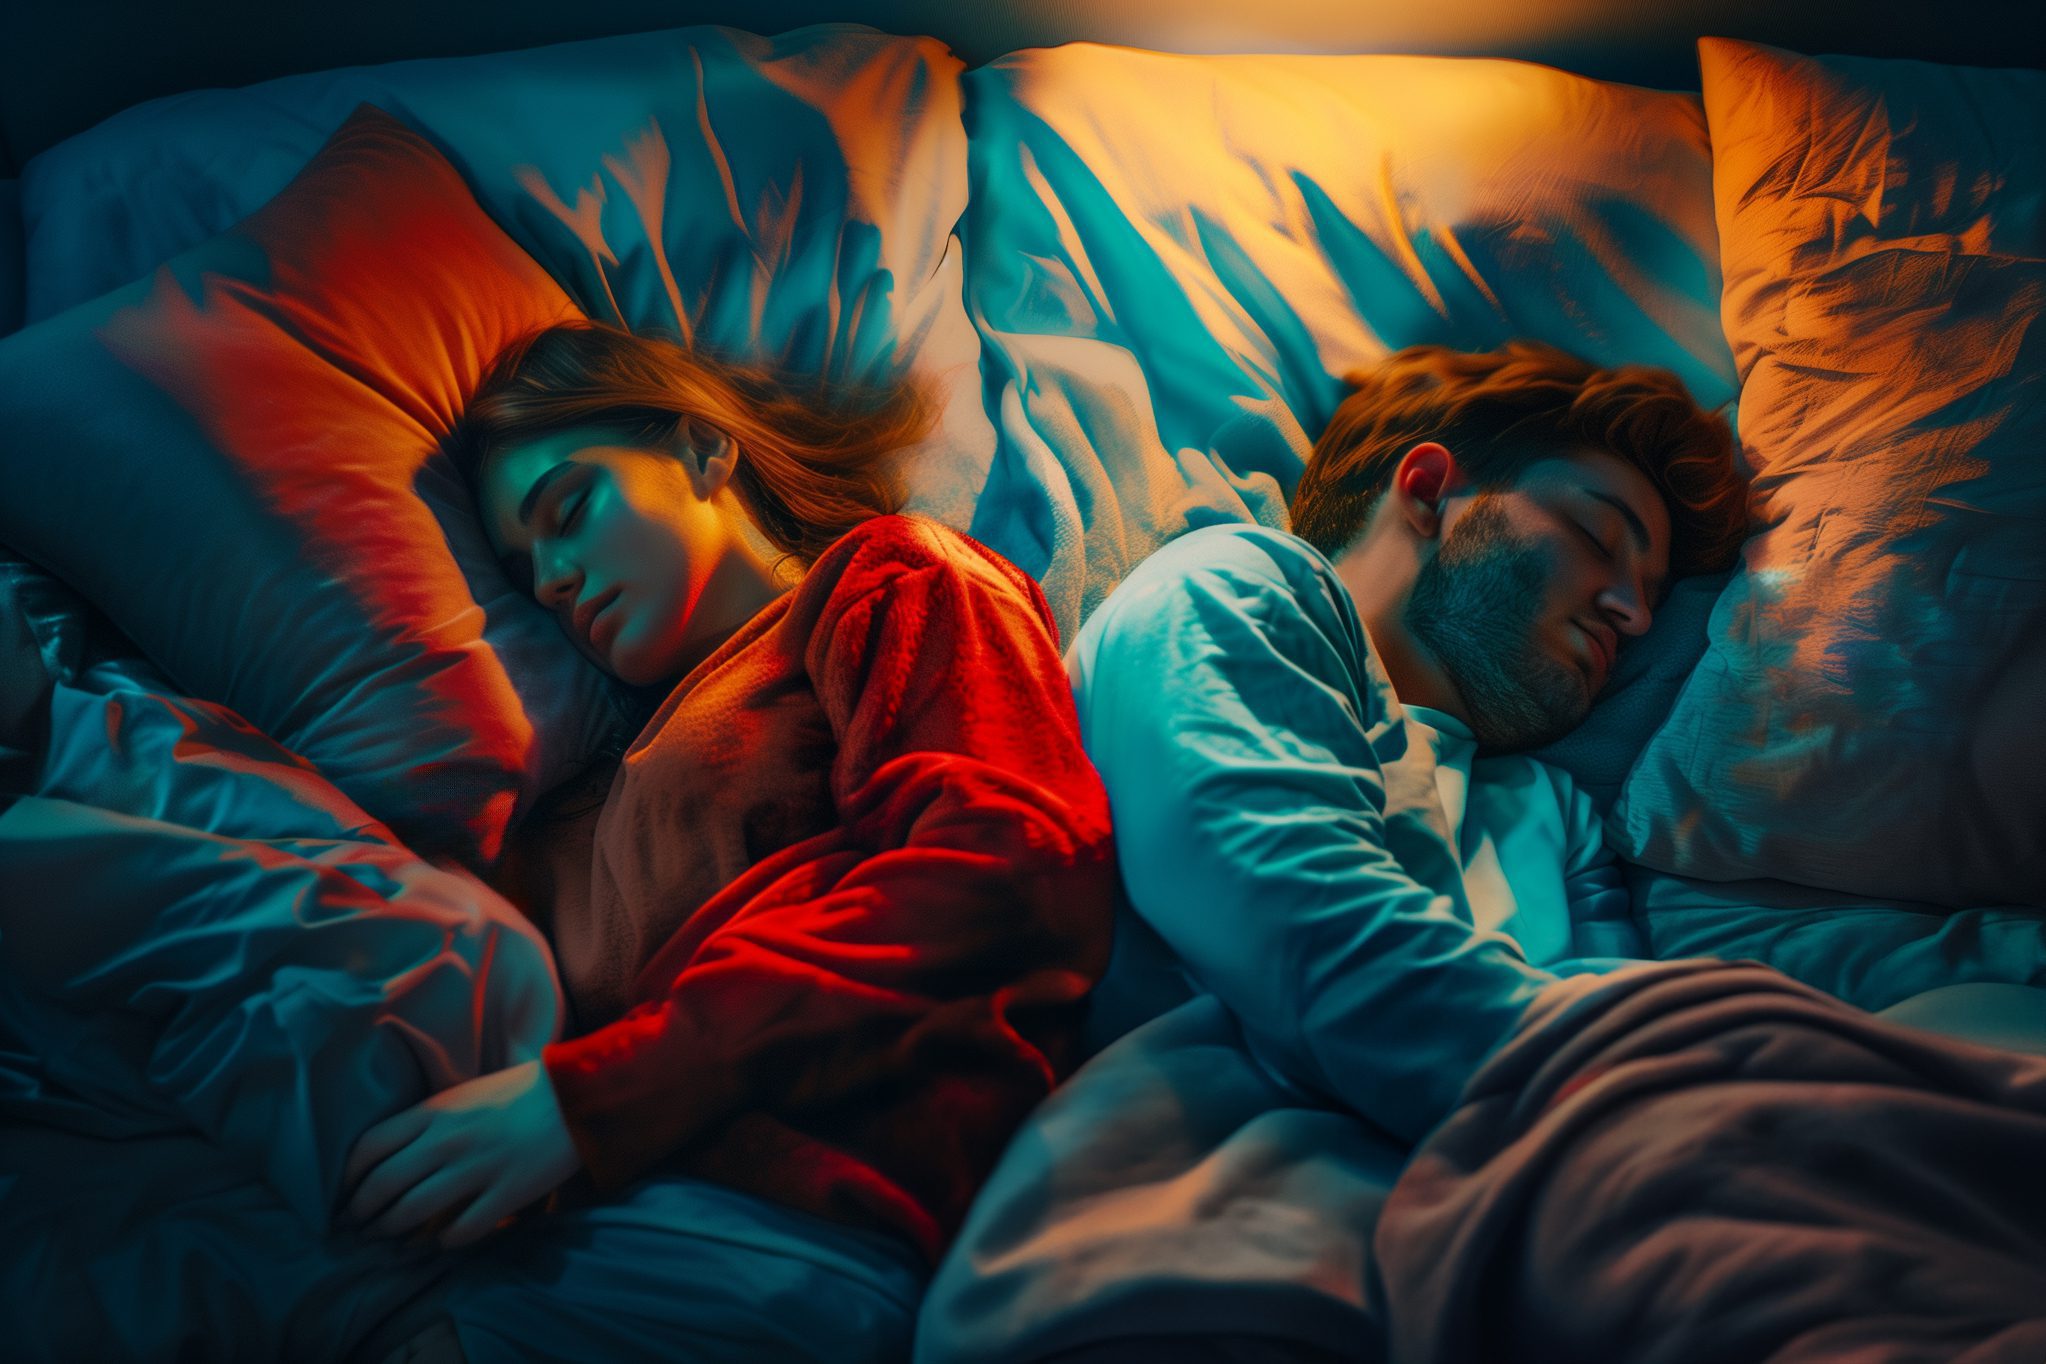 Introverts vs. Extroverts: Comparing Sleep Needs and Patterns